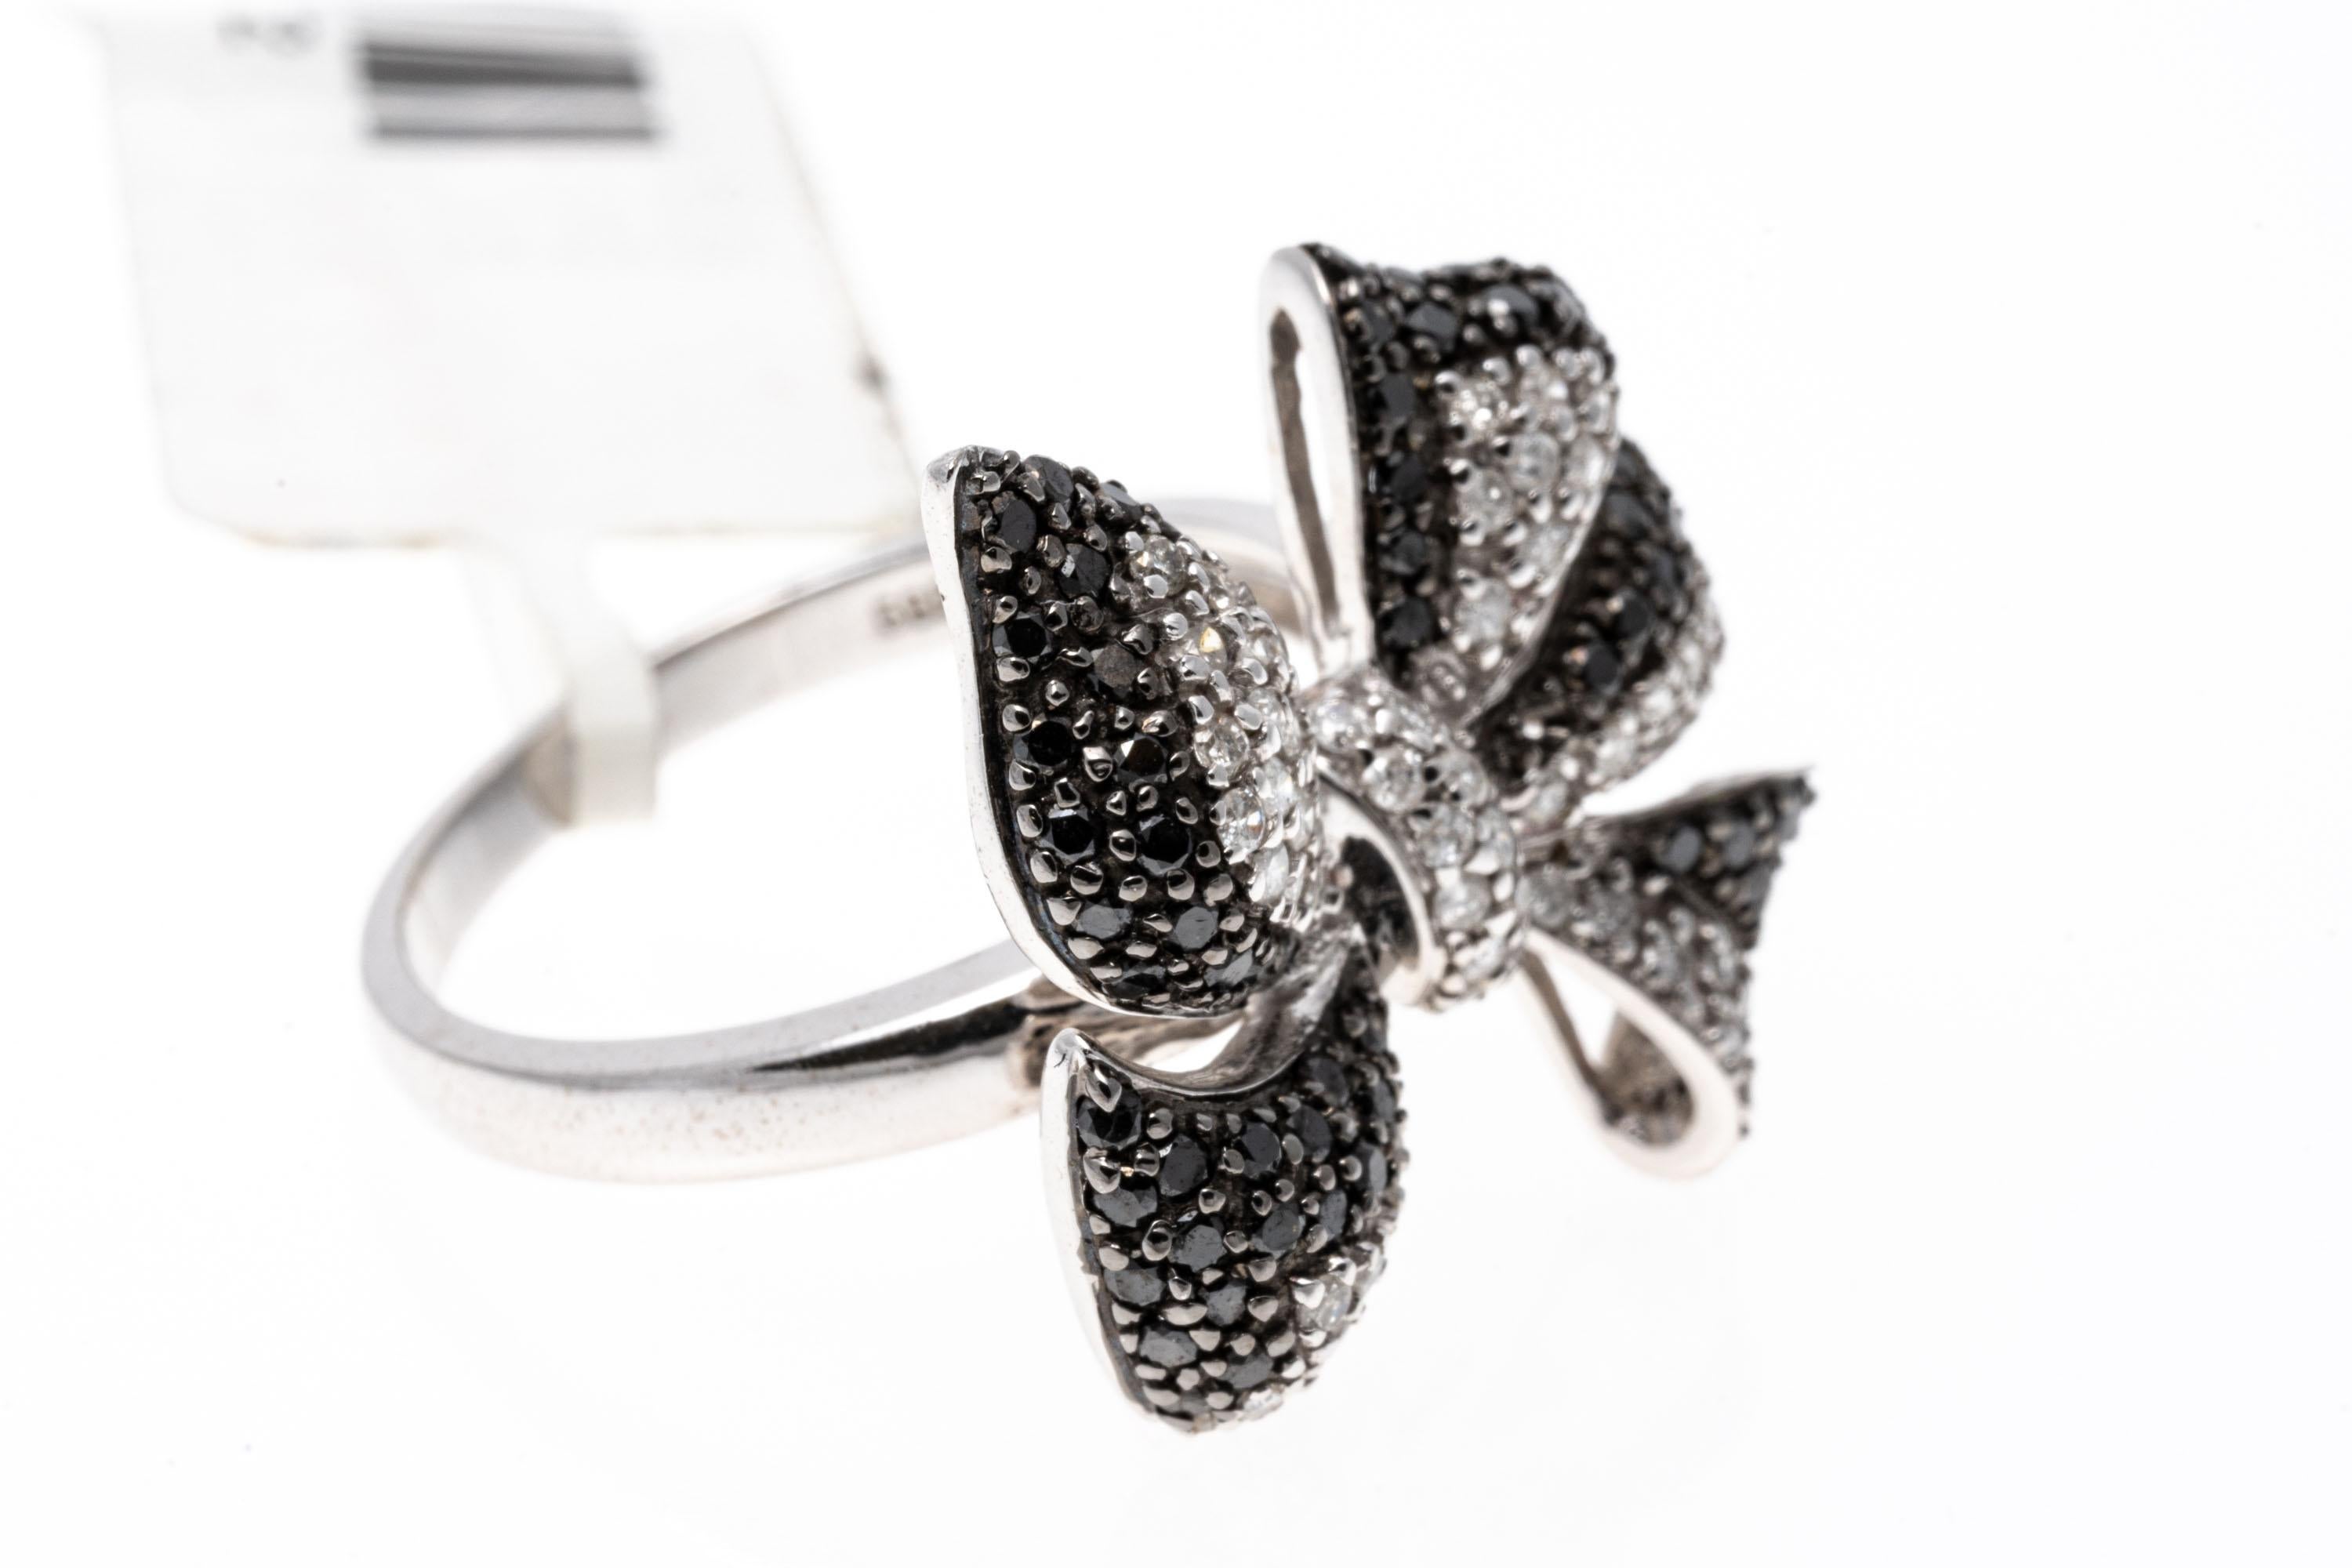 An adorably elegant 14K white gold ring featuring a fanciful bow design set with white diamonds with black diamond trim. Black and white is always a classic! Diamonds approximately 1.0 TCW. Ring size 7.
Marks: 14K 585
Dimensions: 3/4